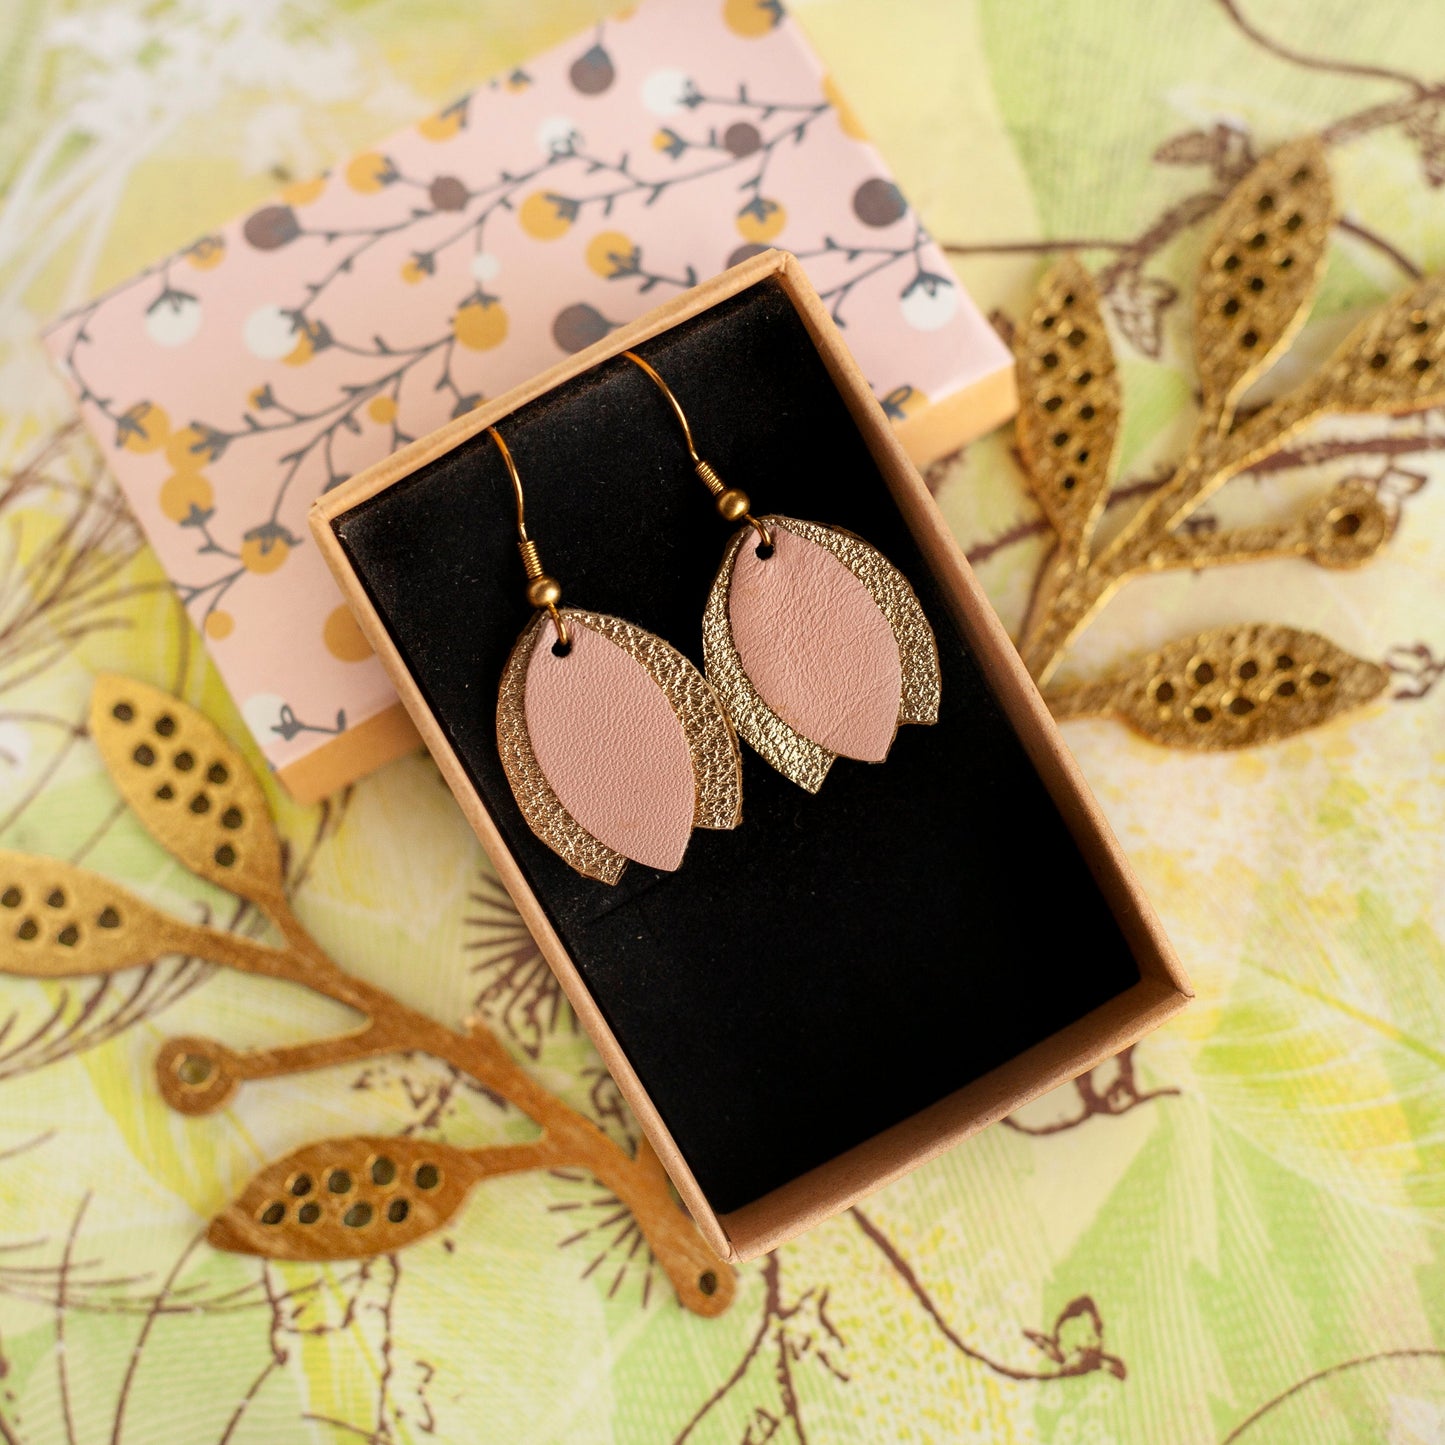 Tulip earrings in pink and gold leather